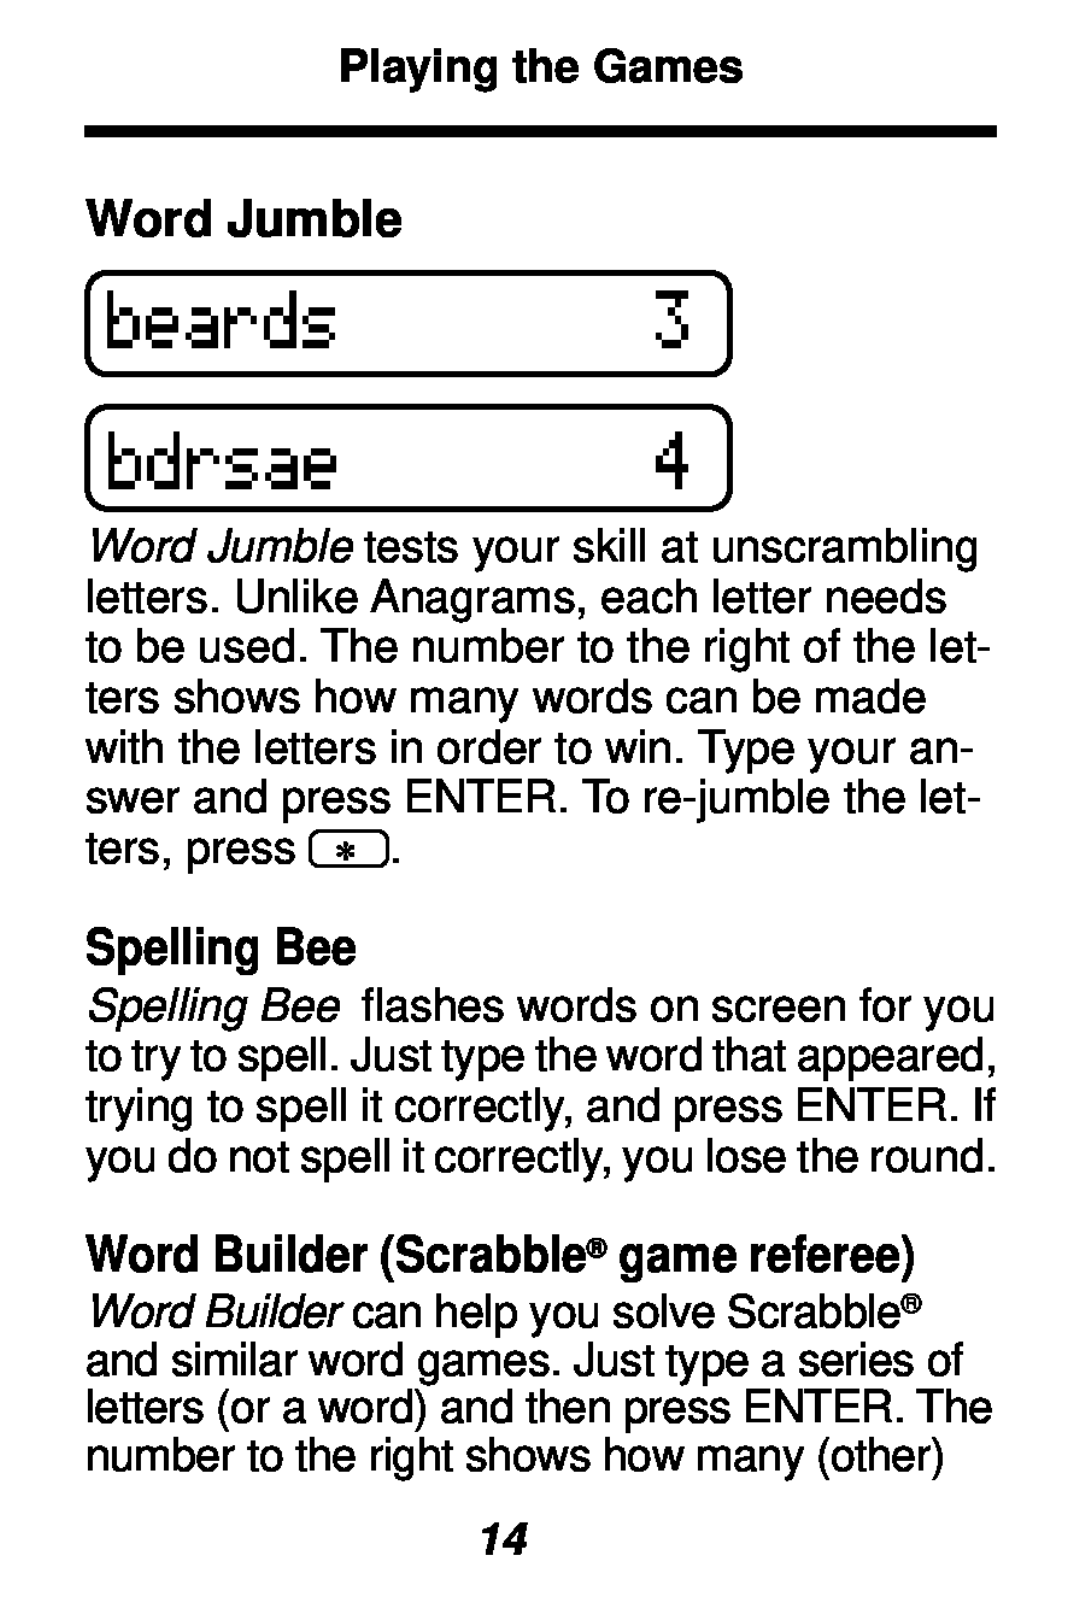 Franklin SA-98 manual Word Jumble, Spelling Bee, Word Builder Scrabble game referee, Playing the Games 